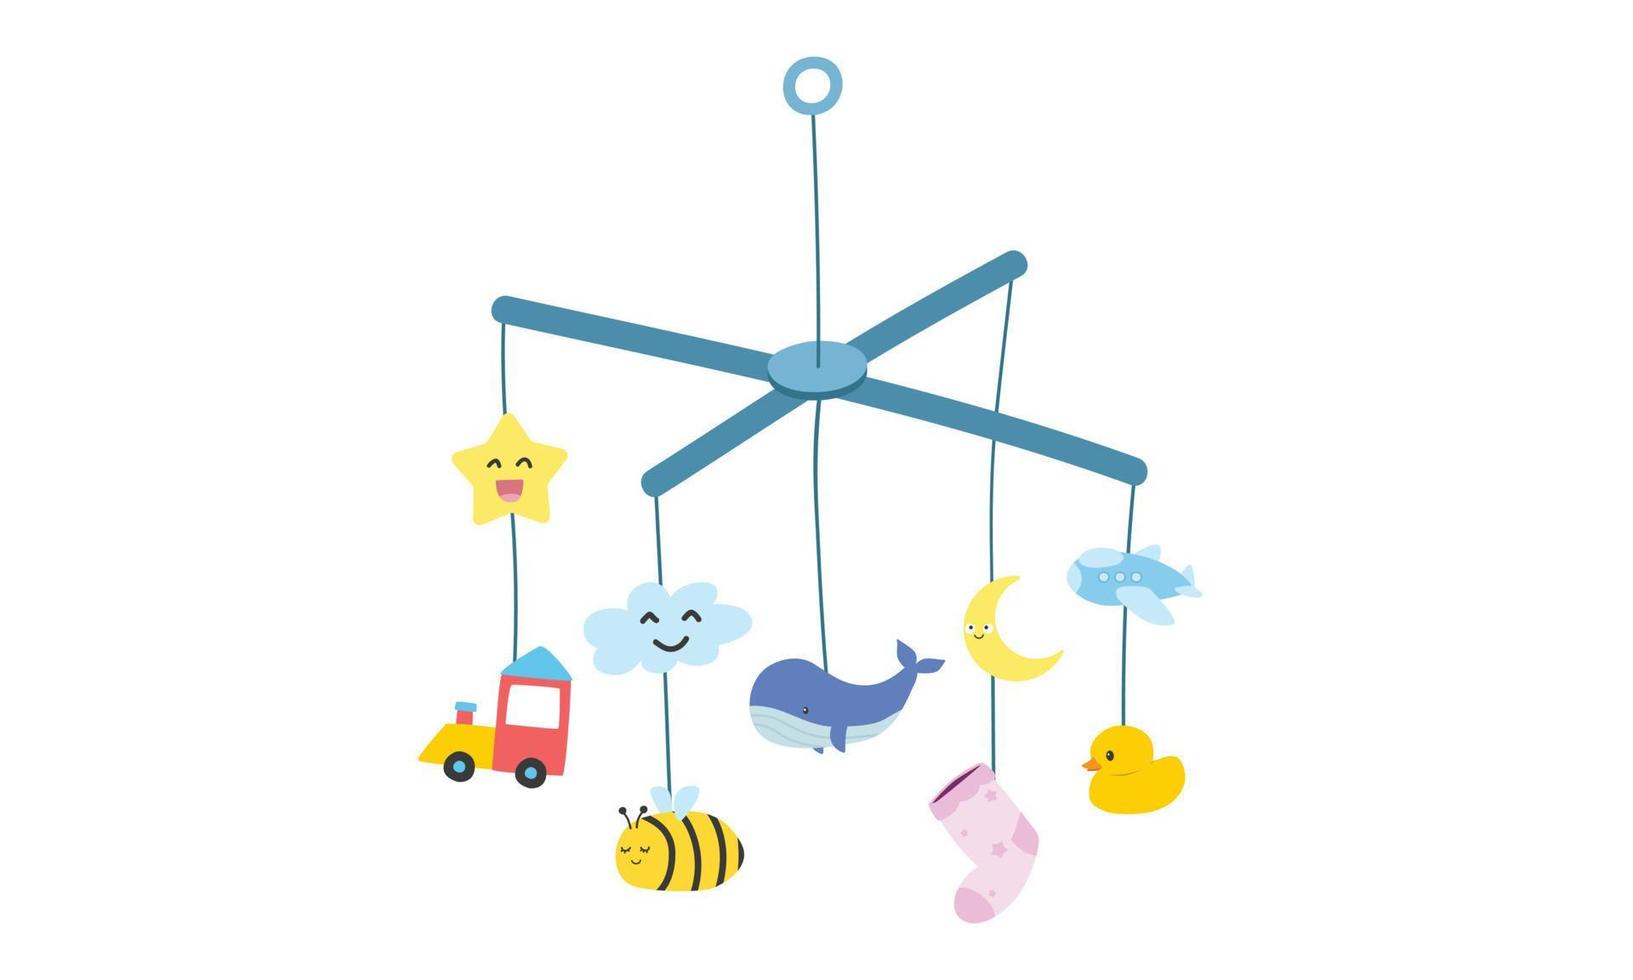 Baby mobile toy clipart. Simple crib mobile hanging toy for baby flat vector illustration isolated. Baby mobile with cute star, cloud, moon, whale, rubber duck, bee, sock, airplane toy cartoon style